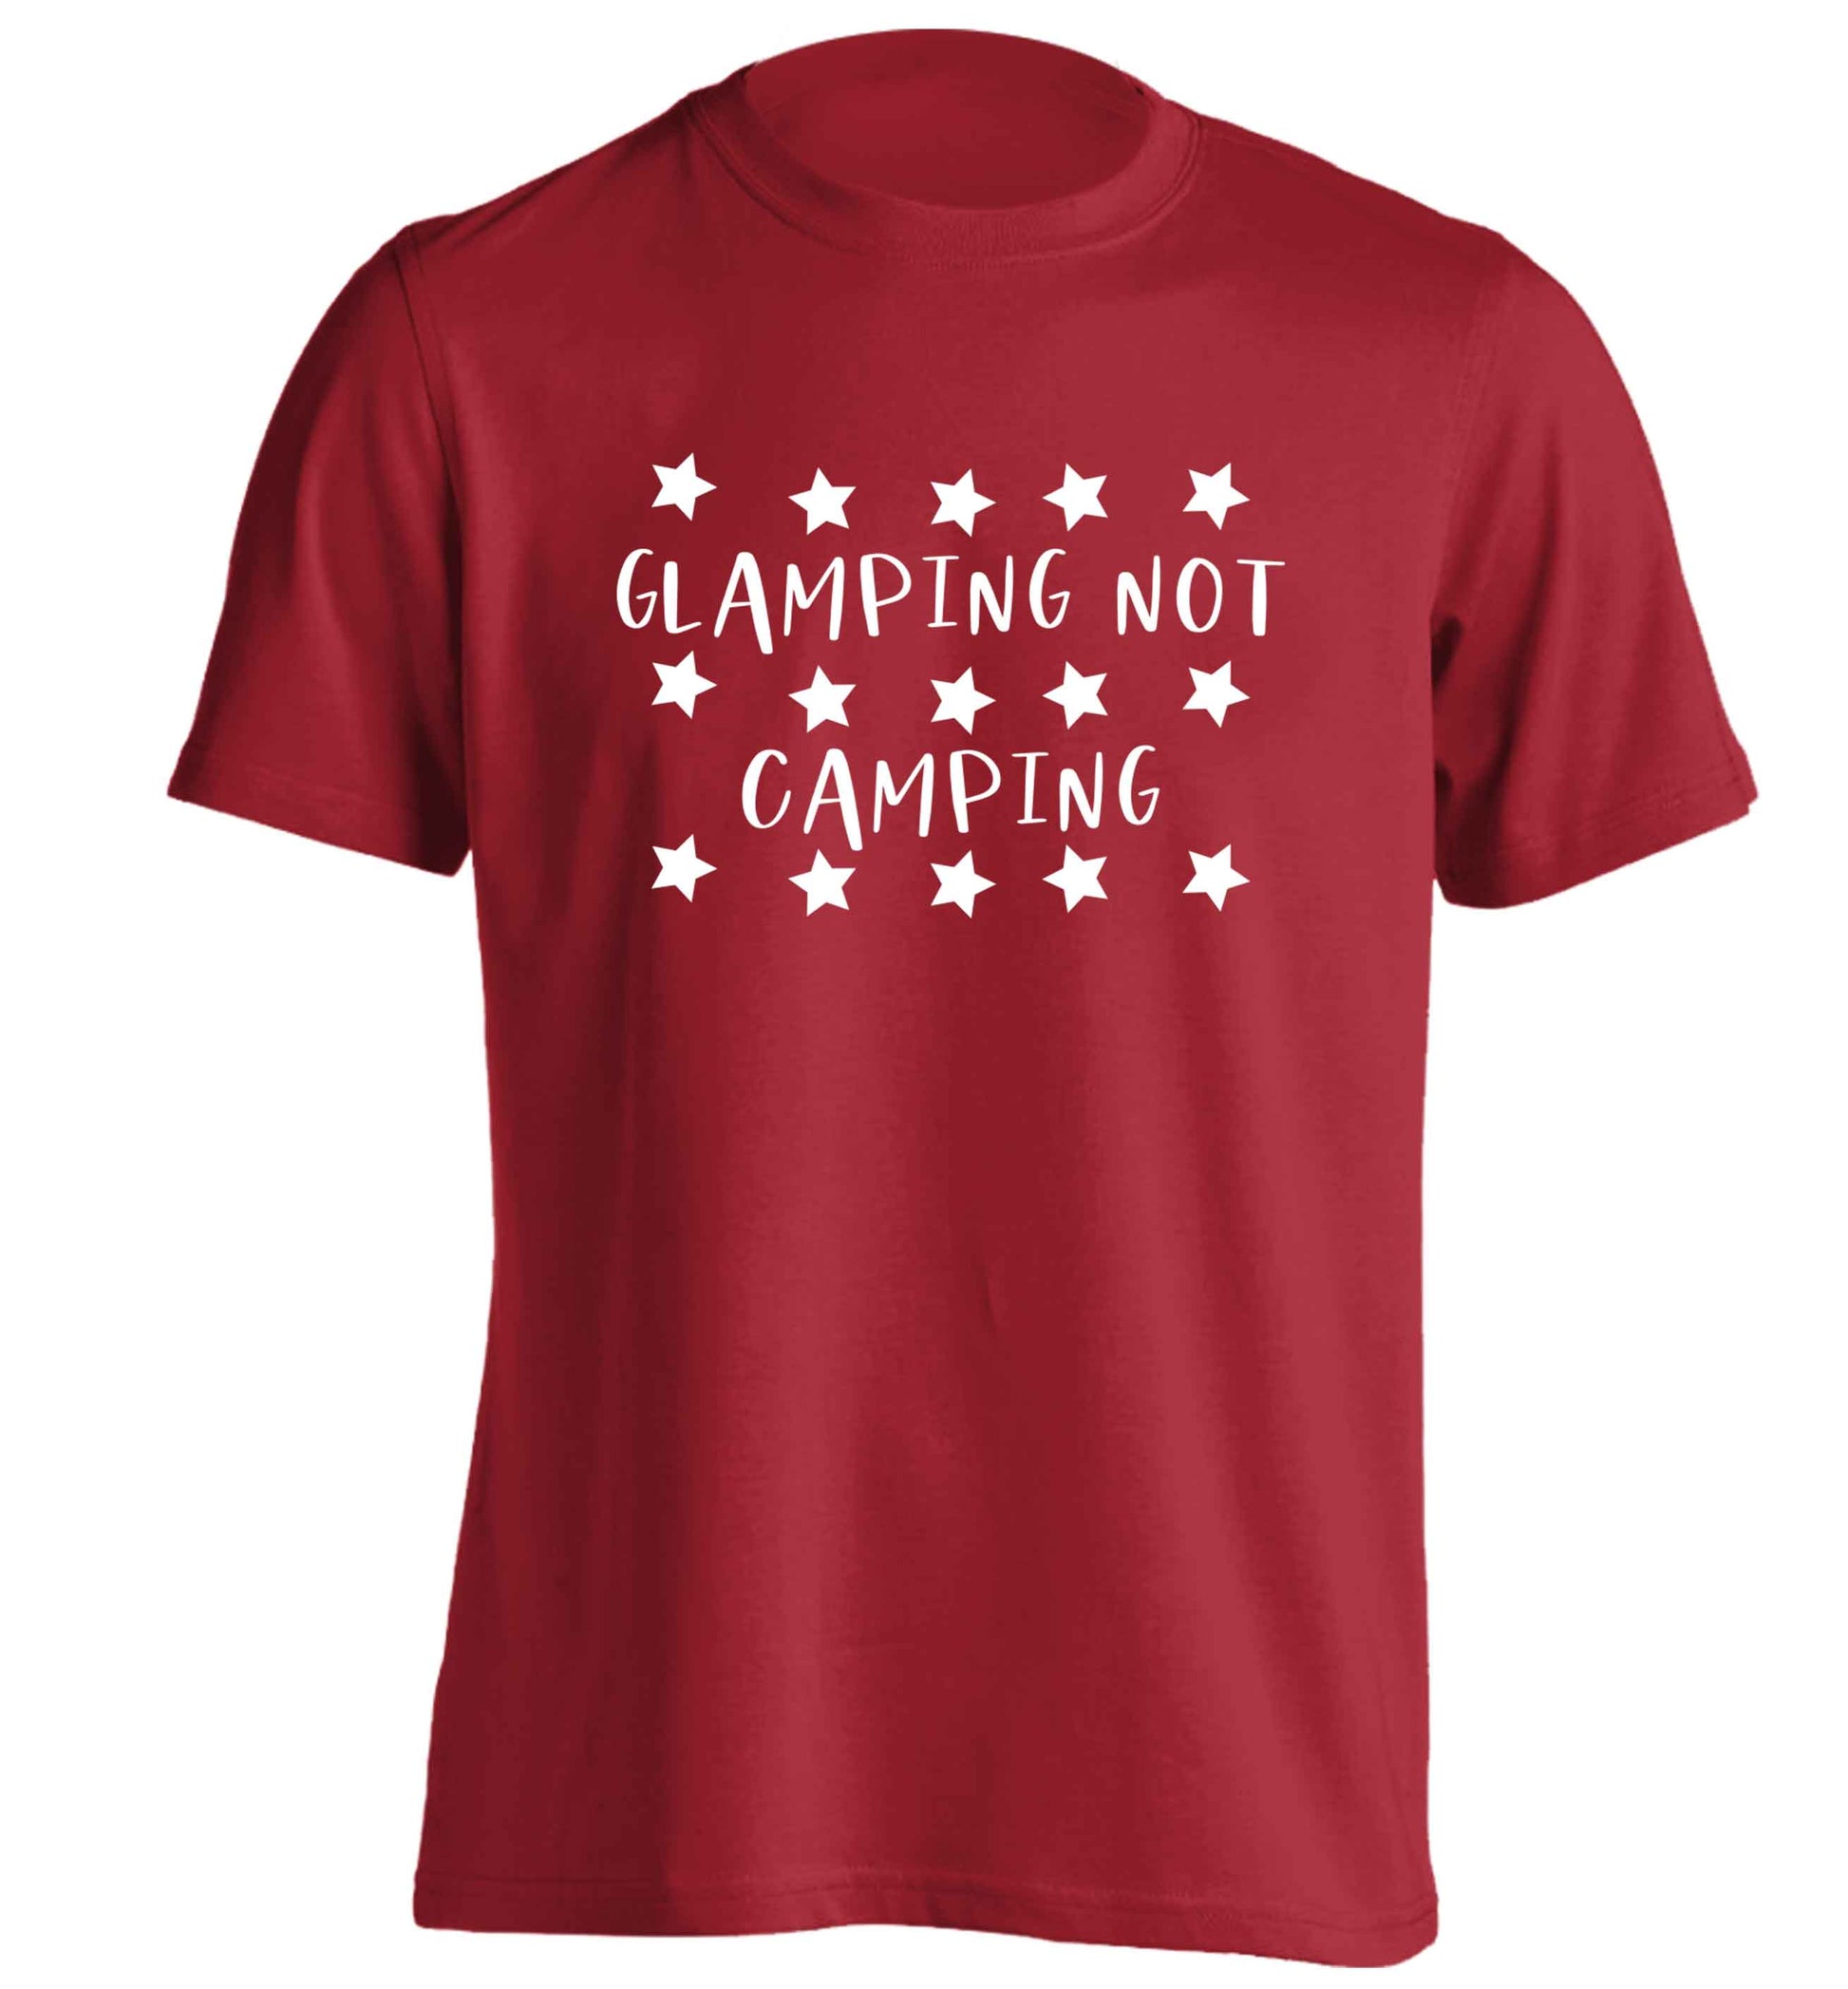 Glamping not camping adults unisex red Tshirt 2XL